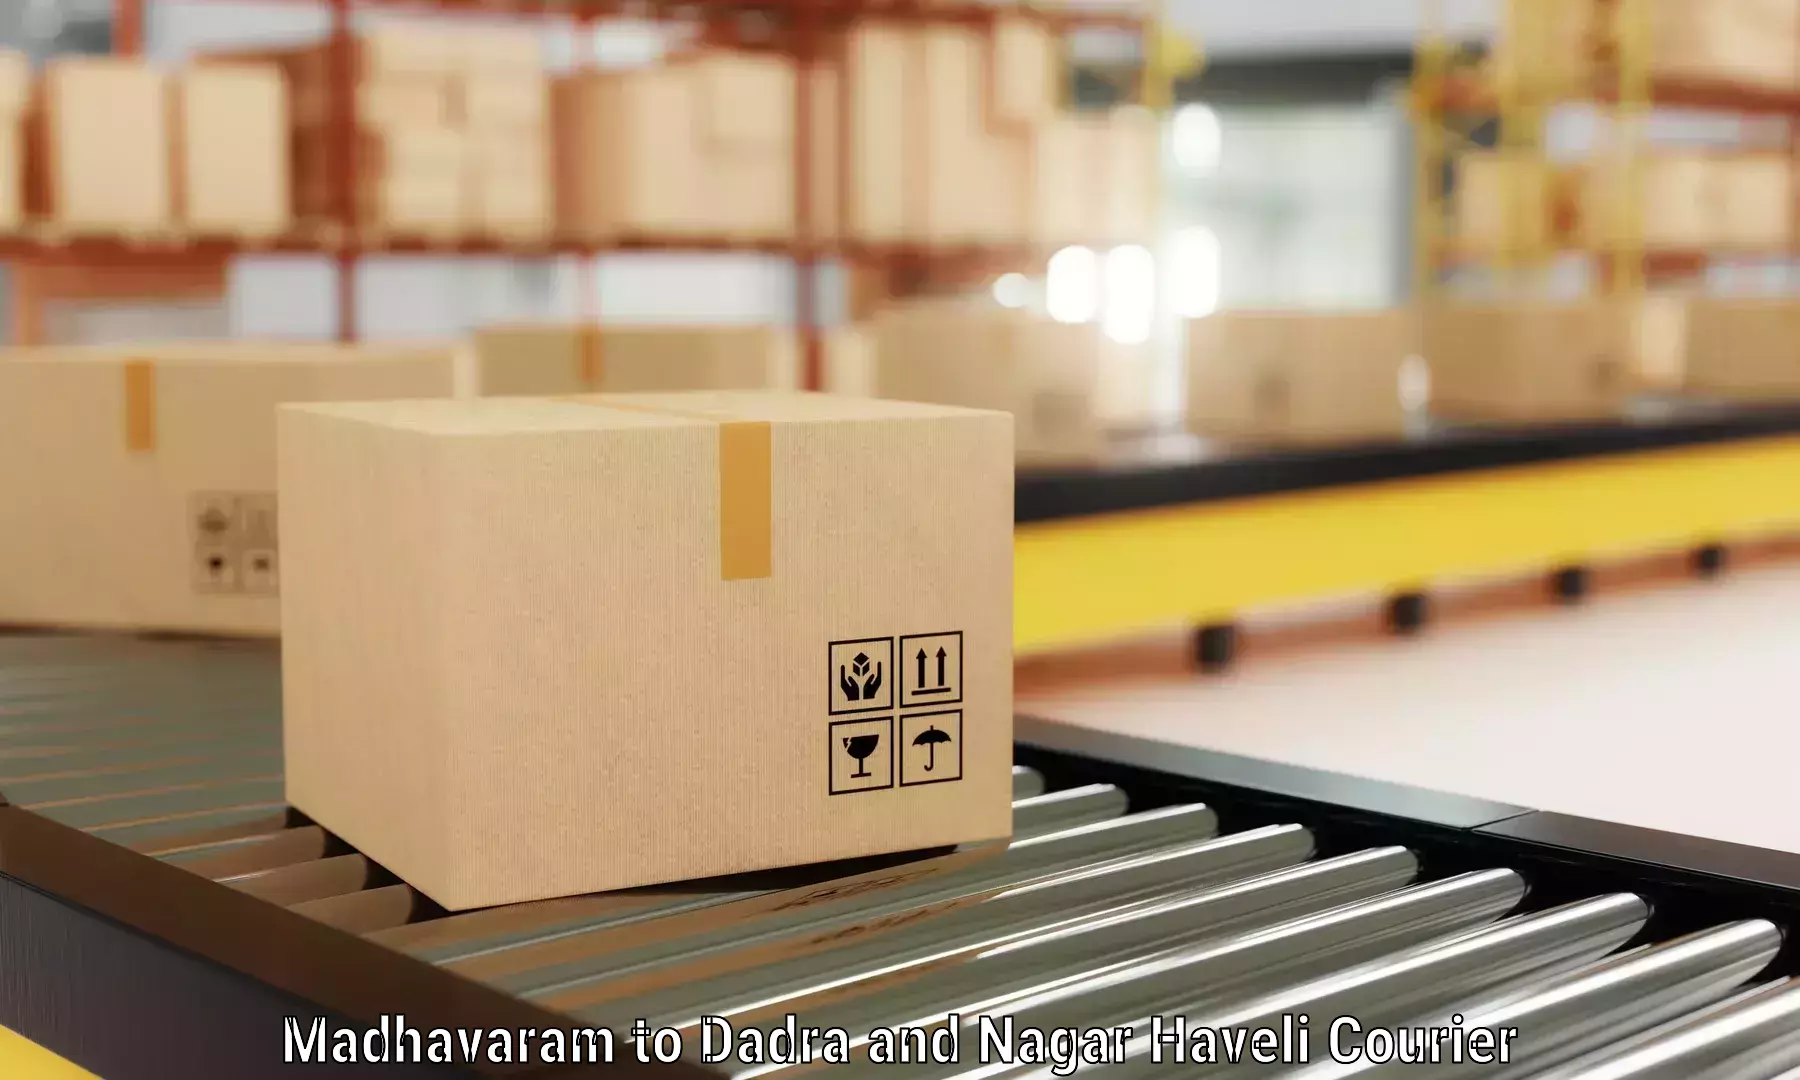 Packing and moving services in Madhavaram to Dadra and Nagar Haveli